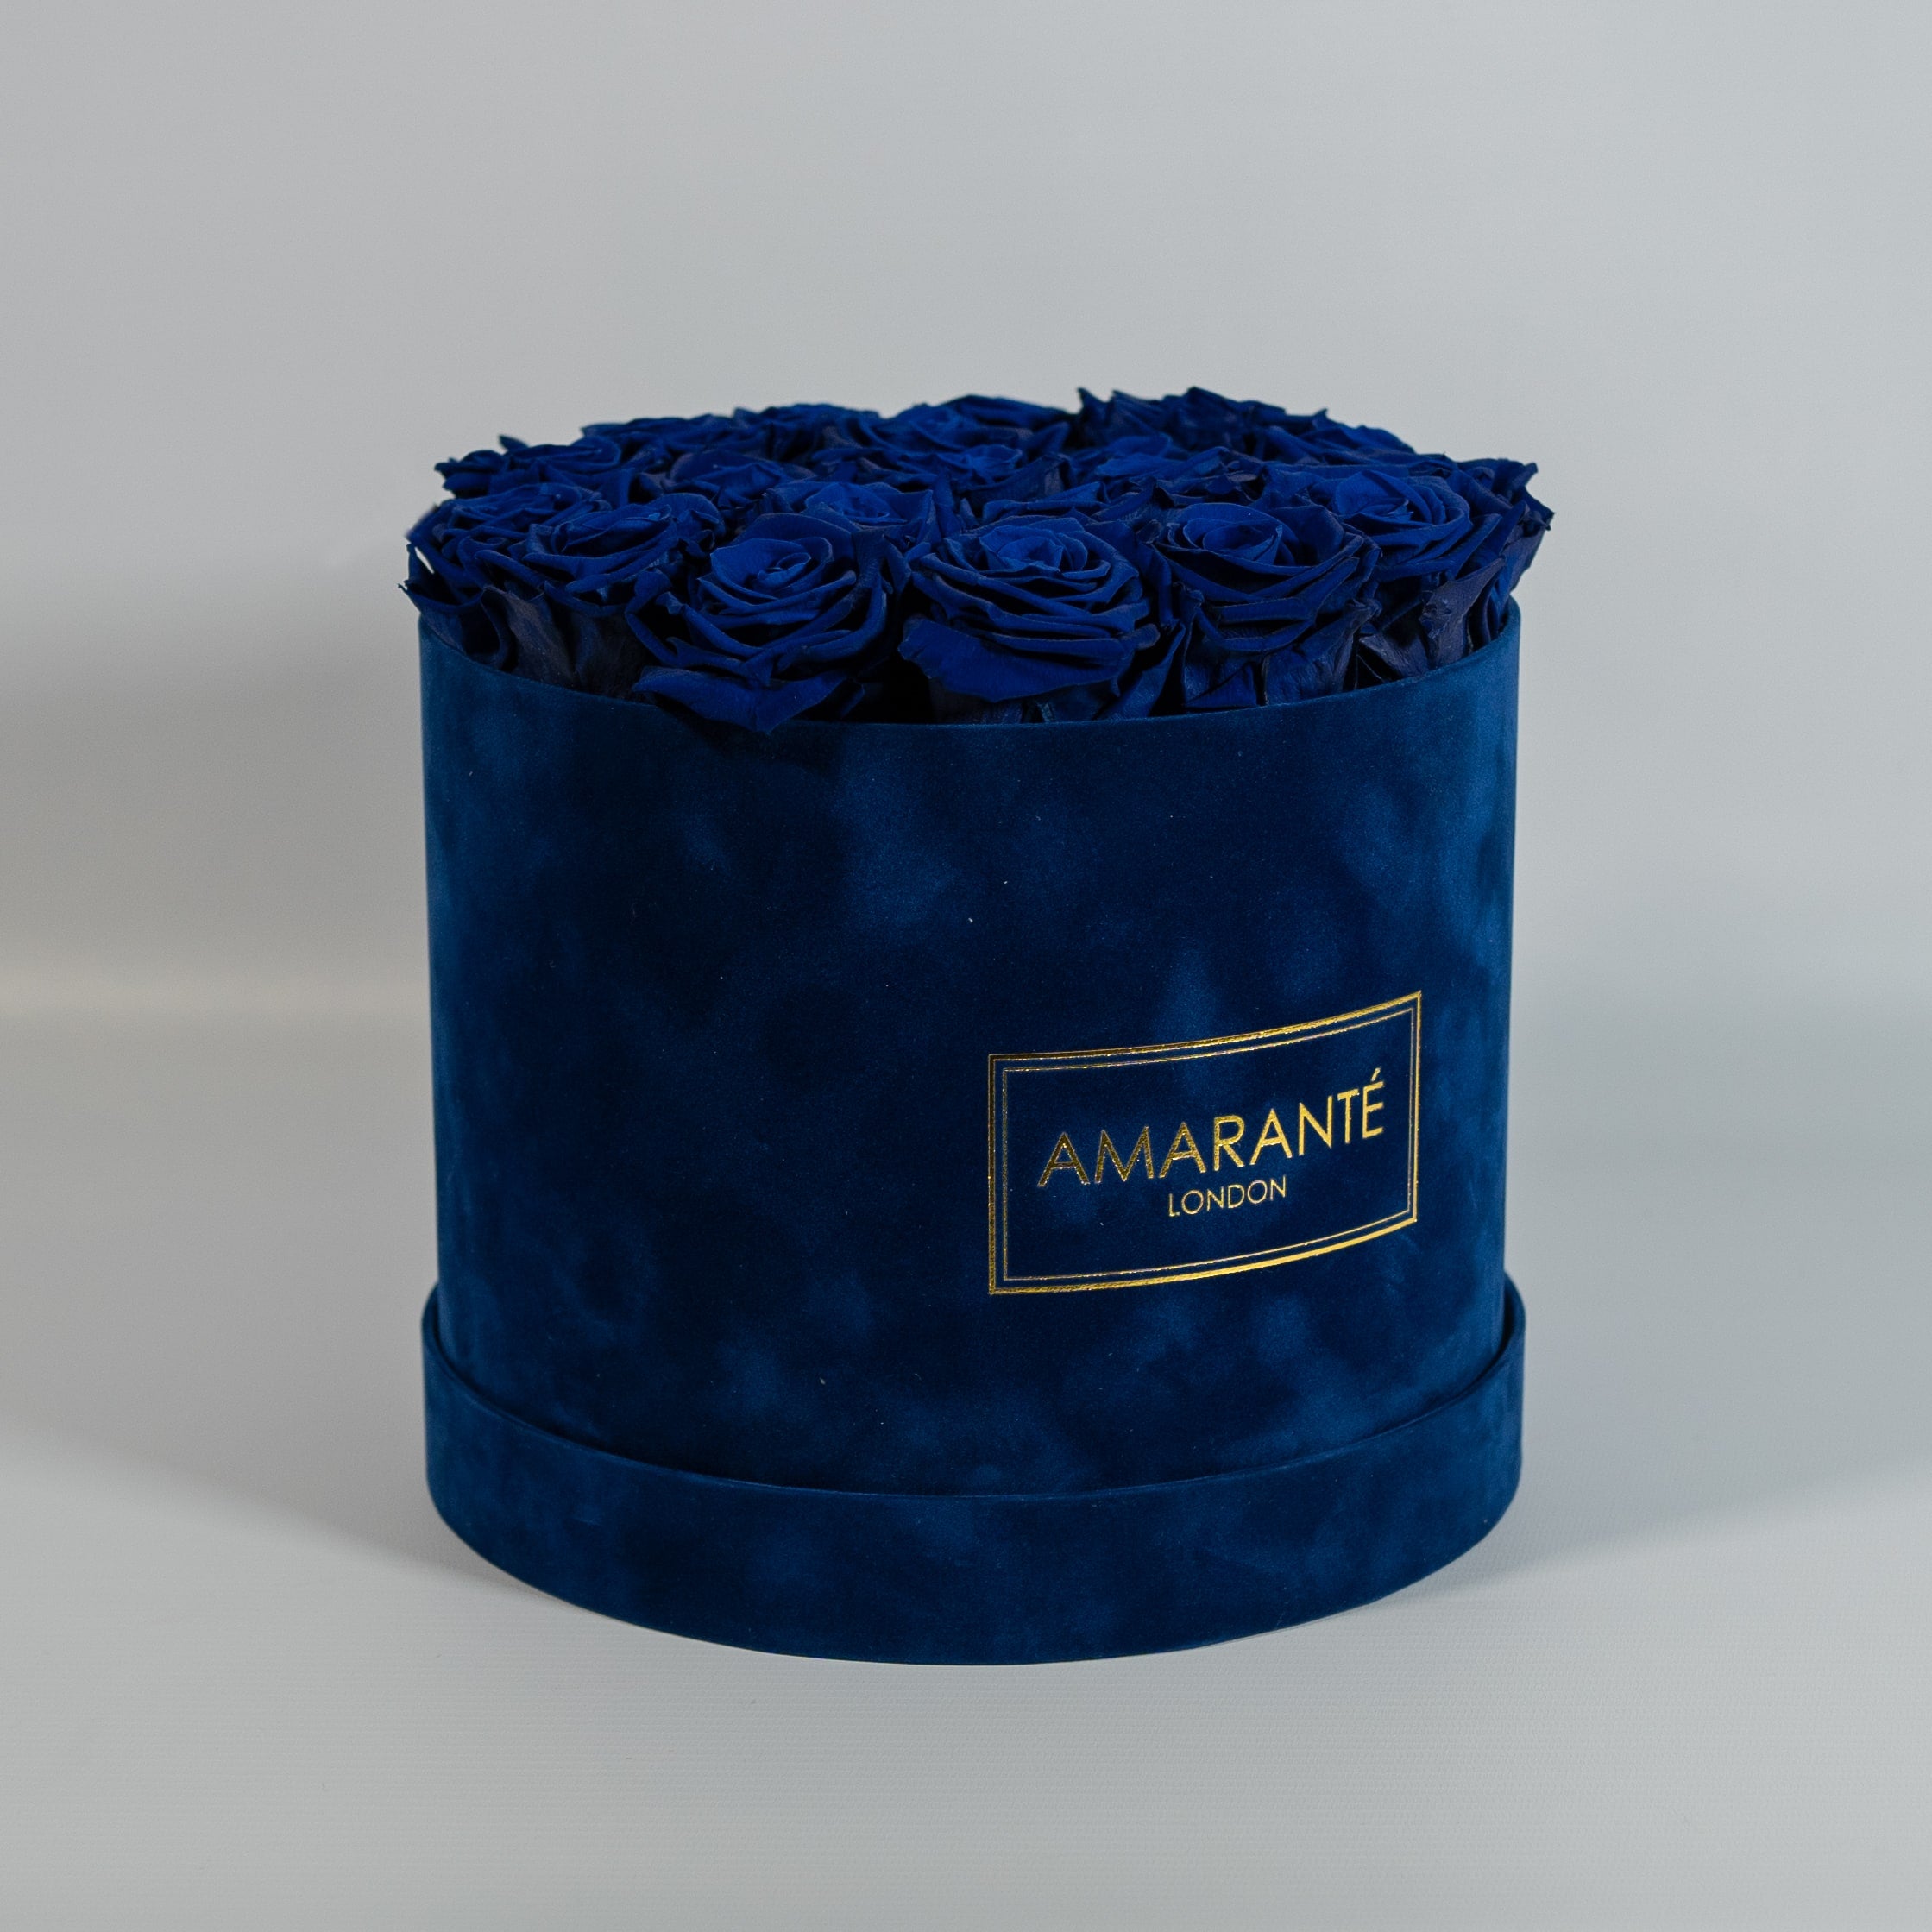 Gorgeous royal blue Roses implying protection and healing  